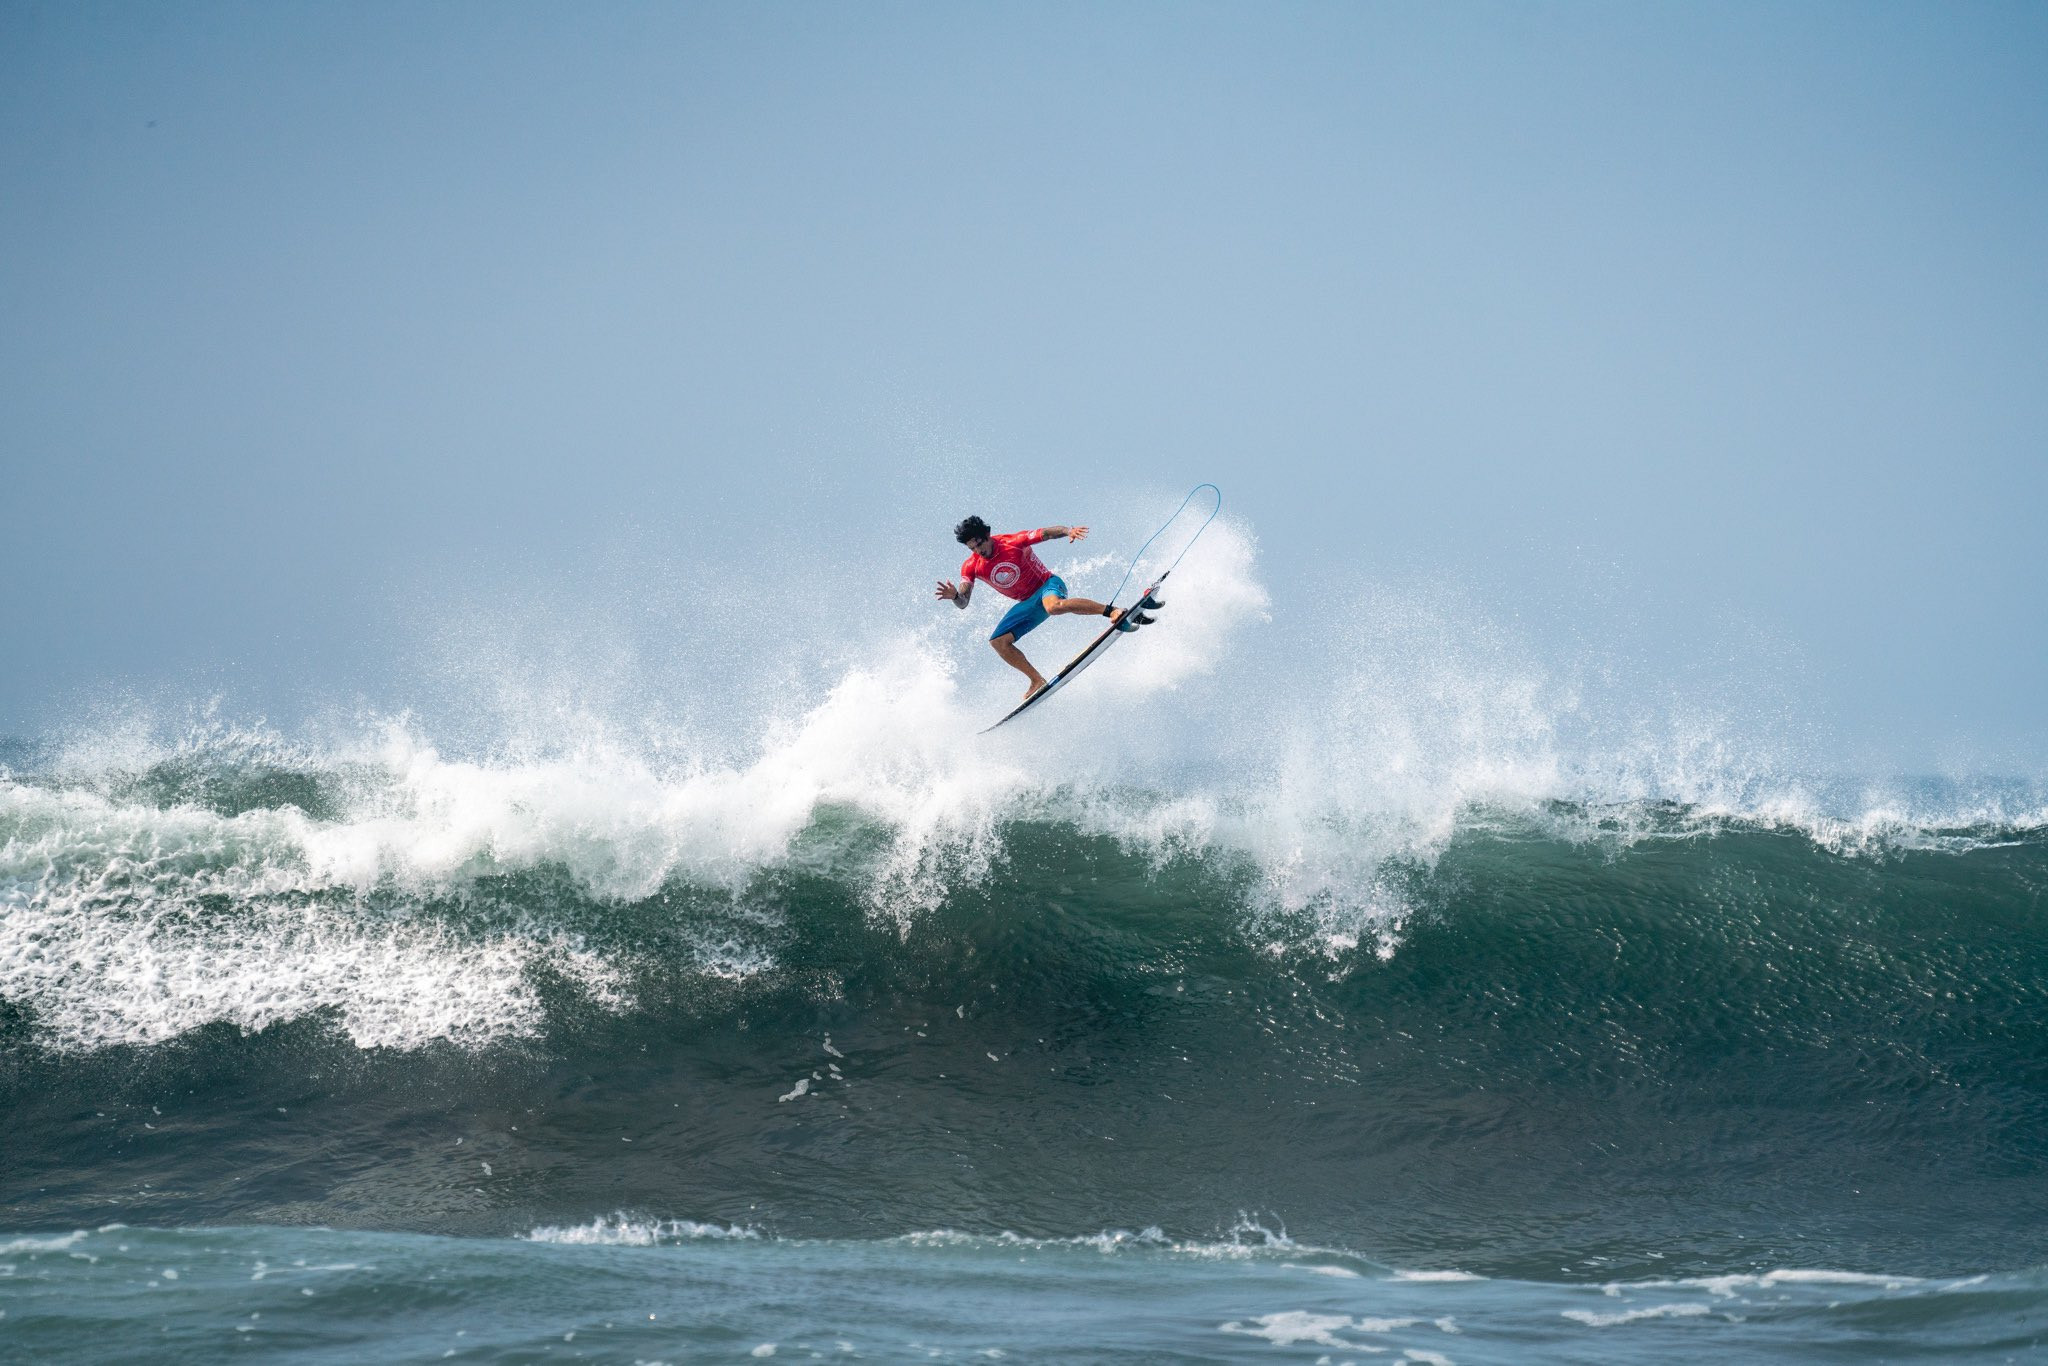 Medina posts another dominant display at World Surfing Games in El Salvador